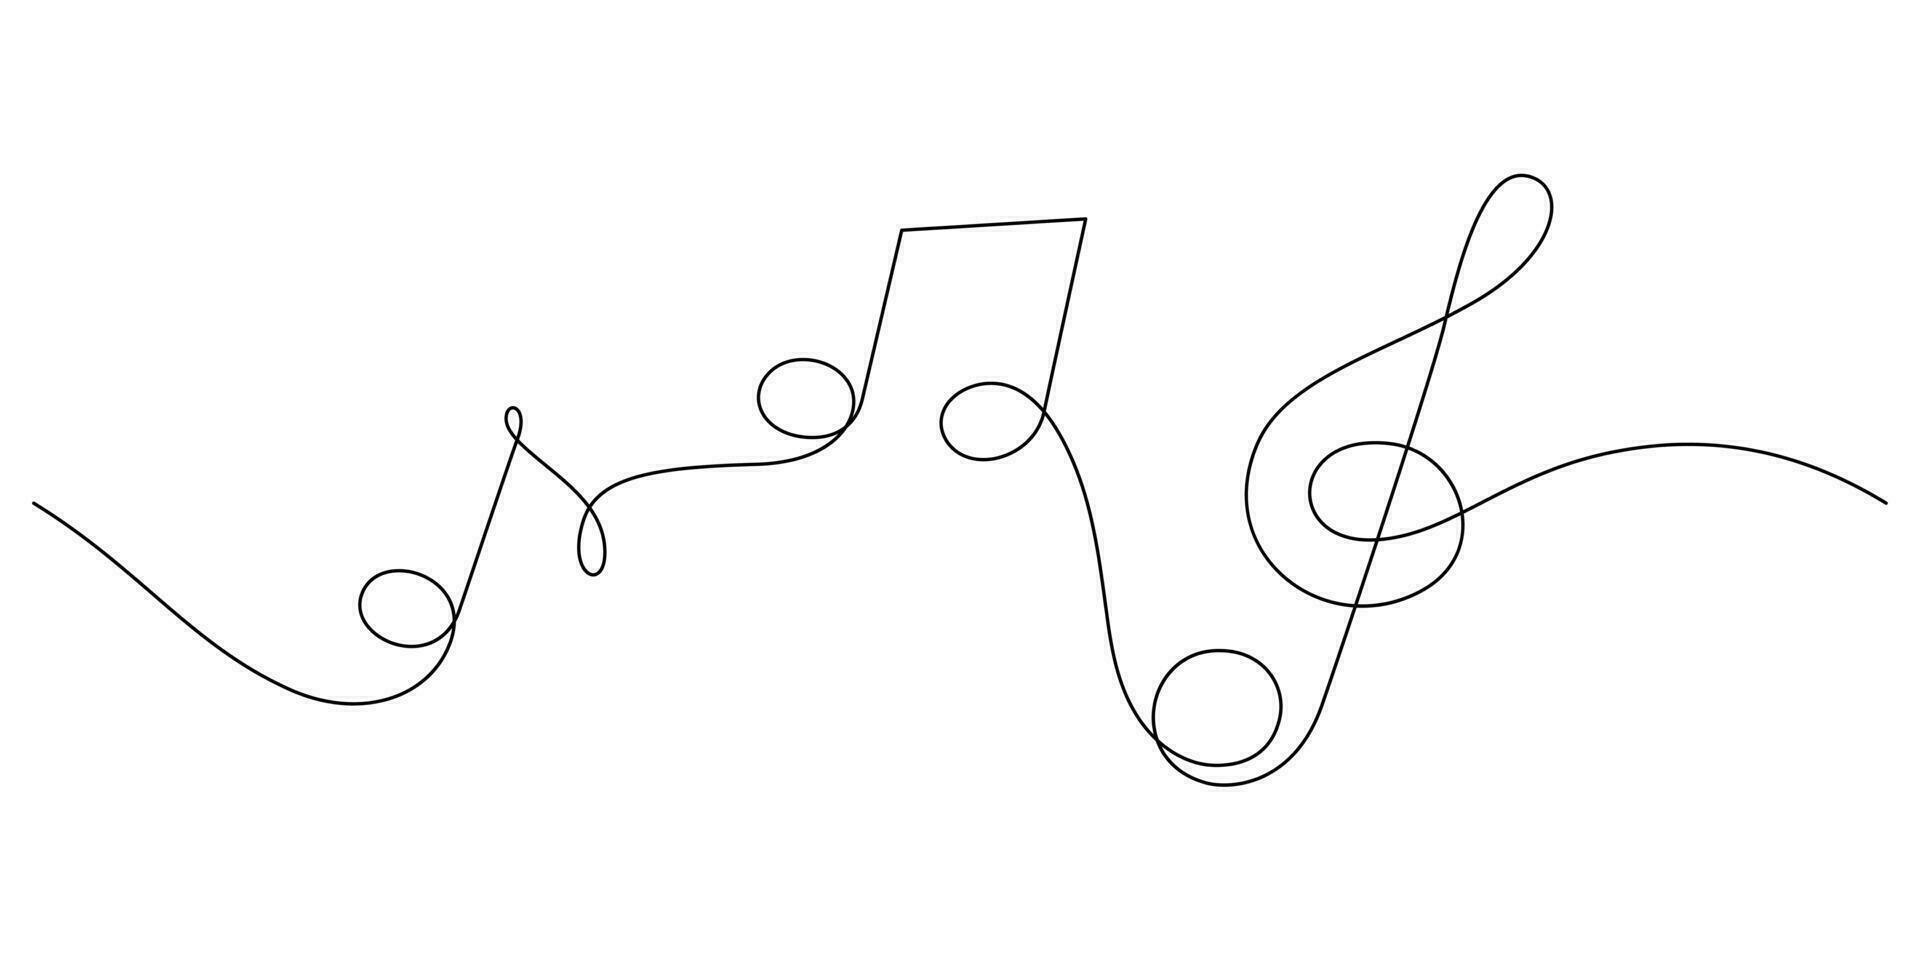 continuous line drawing of treble clef music notes minimalist vector